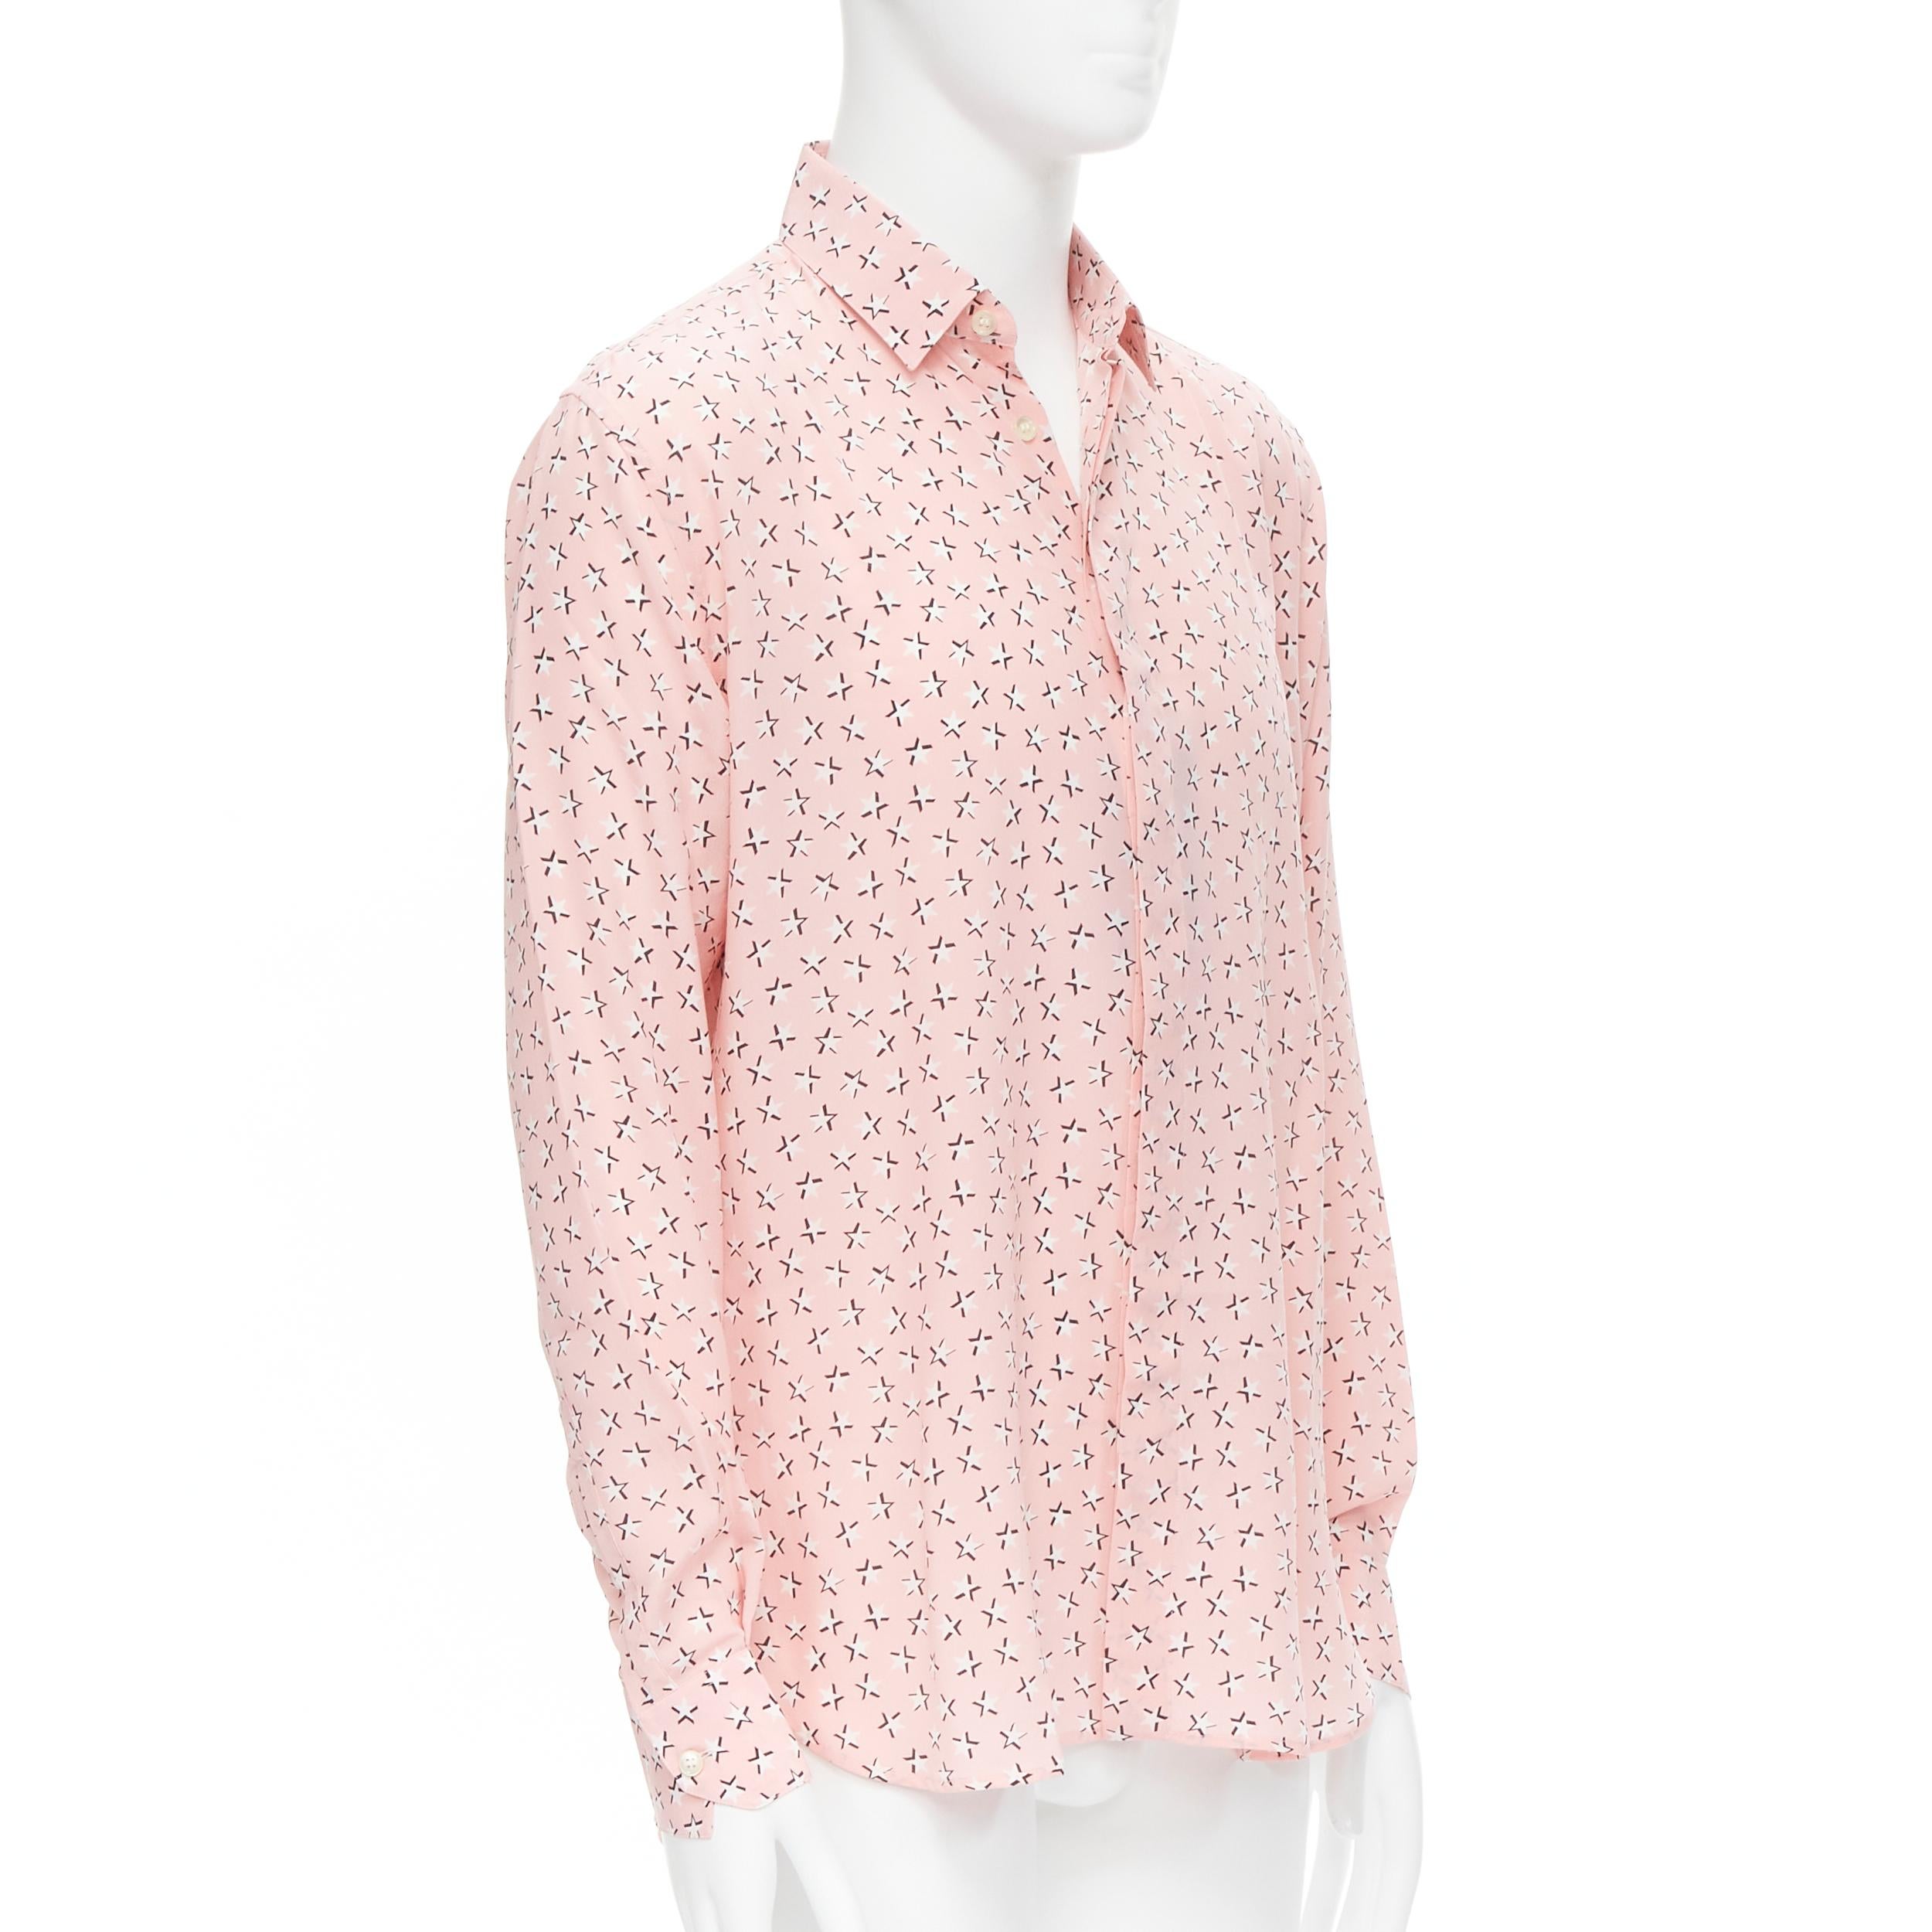 new Saint Laurent 2018 100% silk pink white star print long sleeve shirt S EU38 
Reference: TGAS/B01774 
Brand: Saint Laurent 
Collection: 2018 
Material: Silk 
Color: Pink 
Pattern: Star 
Closure: Button 
Extra Detail: Concealed button front.